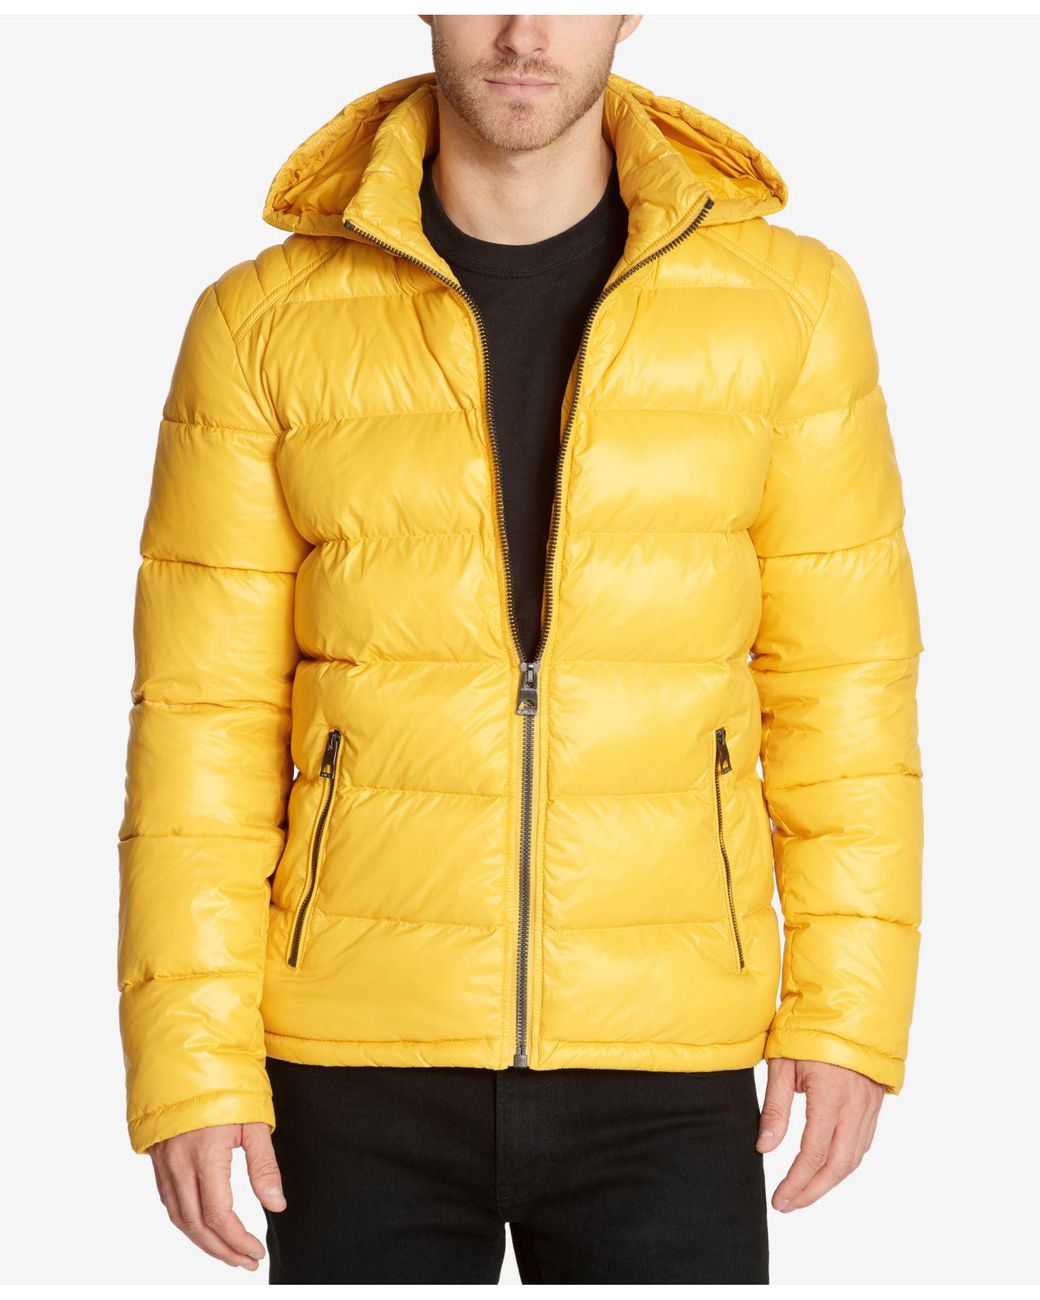 Guess Synthetic Hooded Puffer Coat in Yellow for Men - Lyst